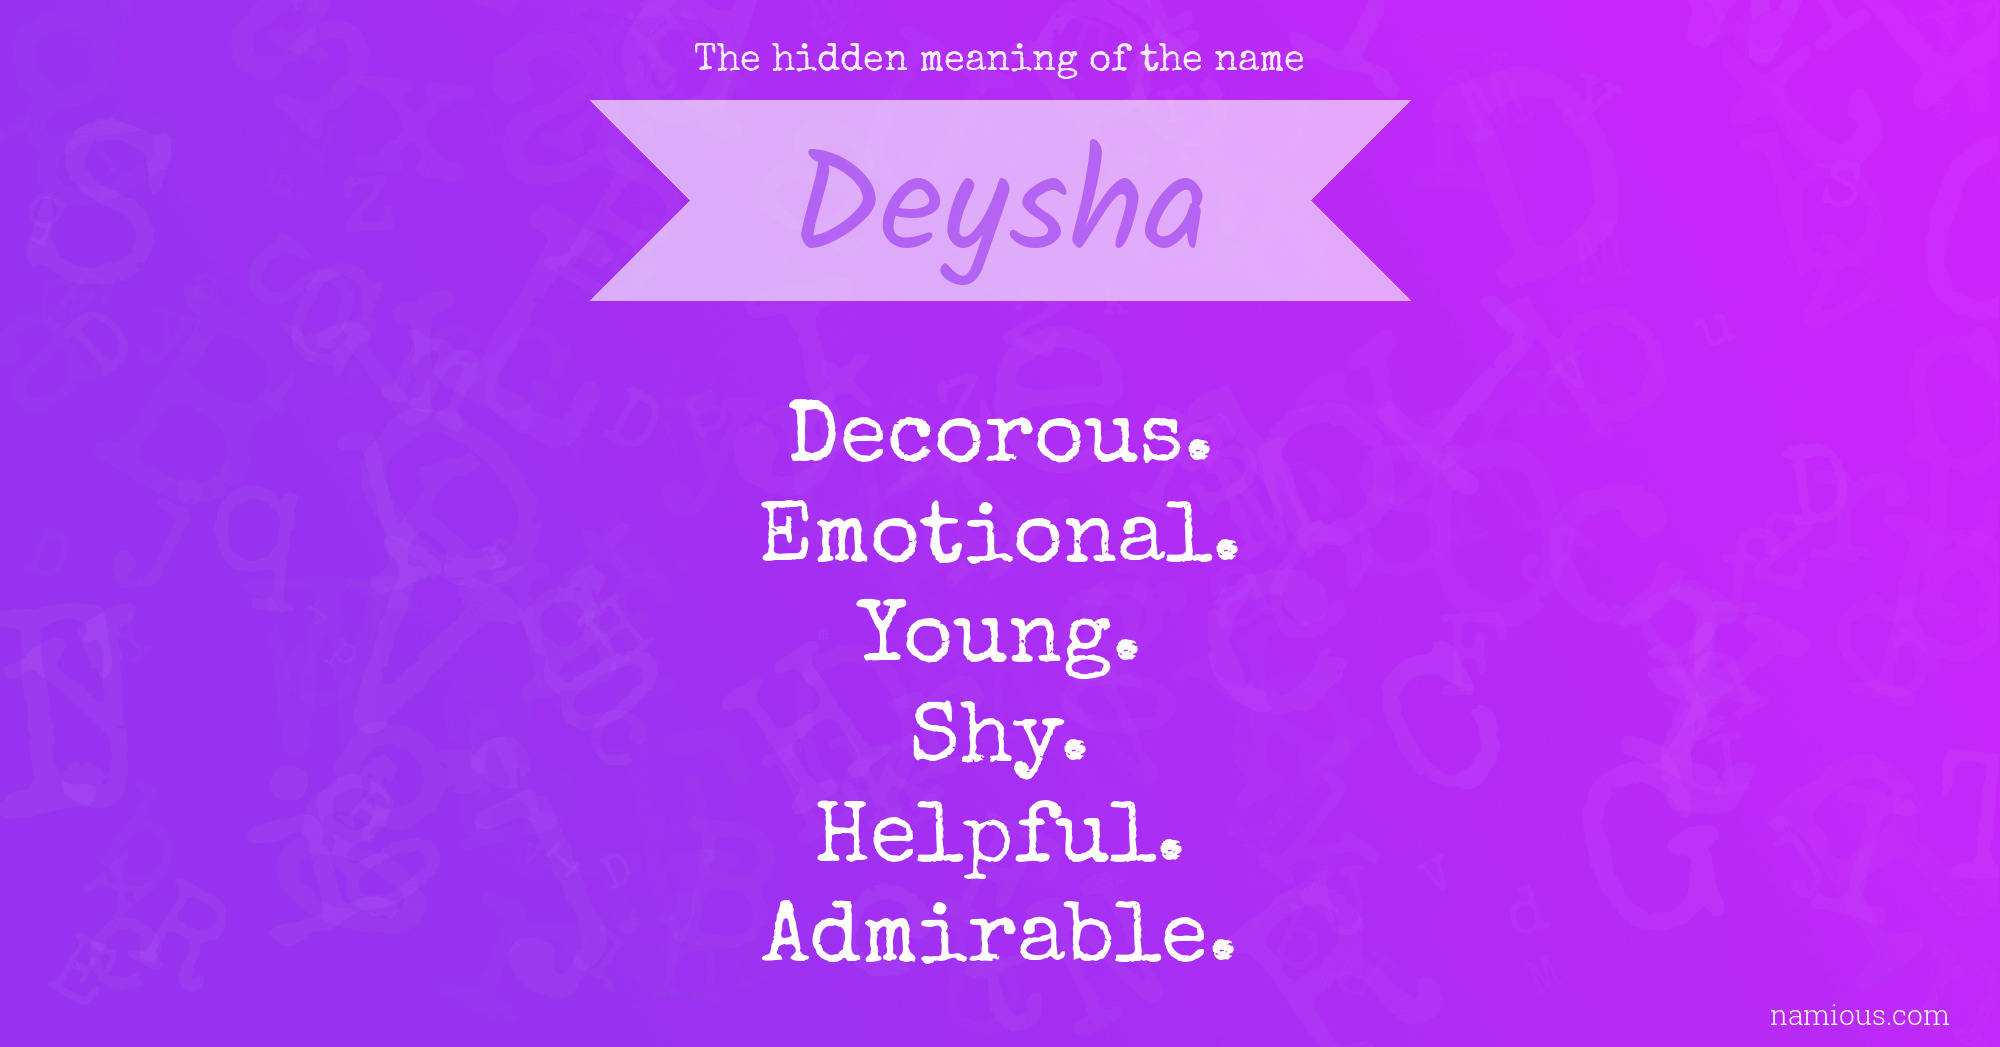 The hidden meaning of the name Deysha